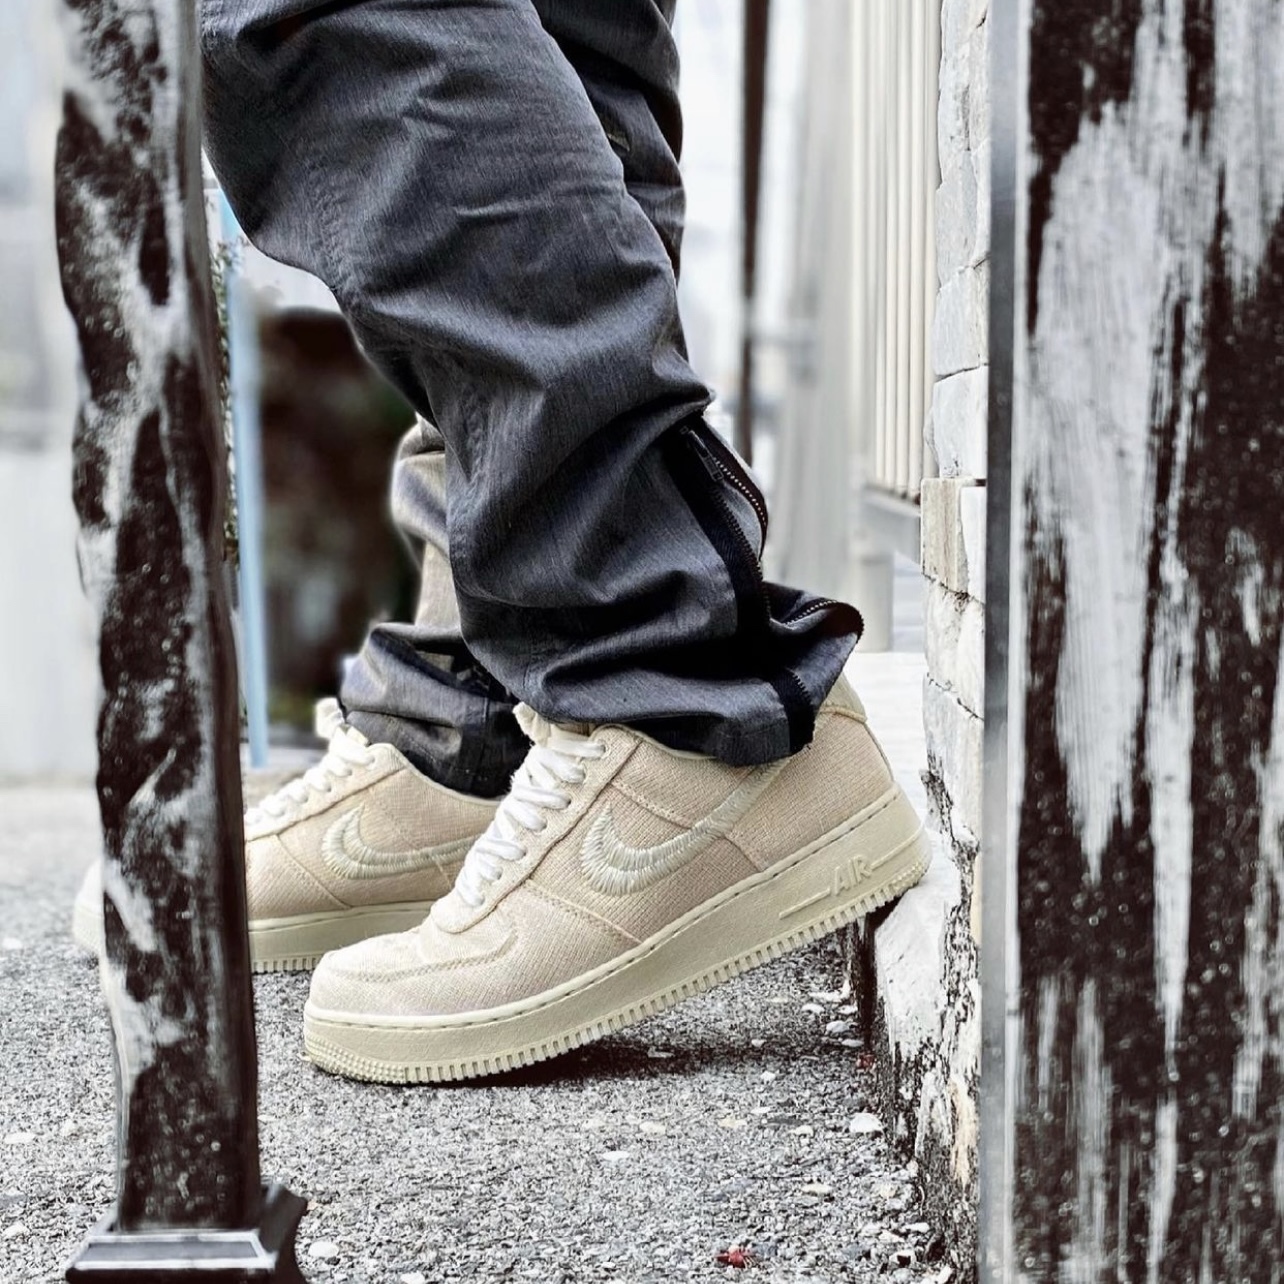 Stussy Nike Air Force 1 Low Fossil Stone 23.5cm CZ9084-200-